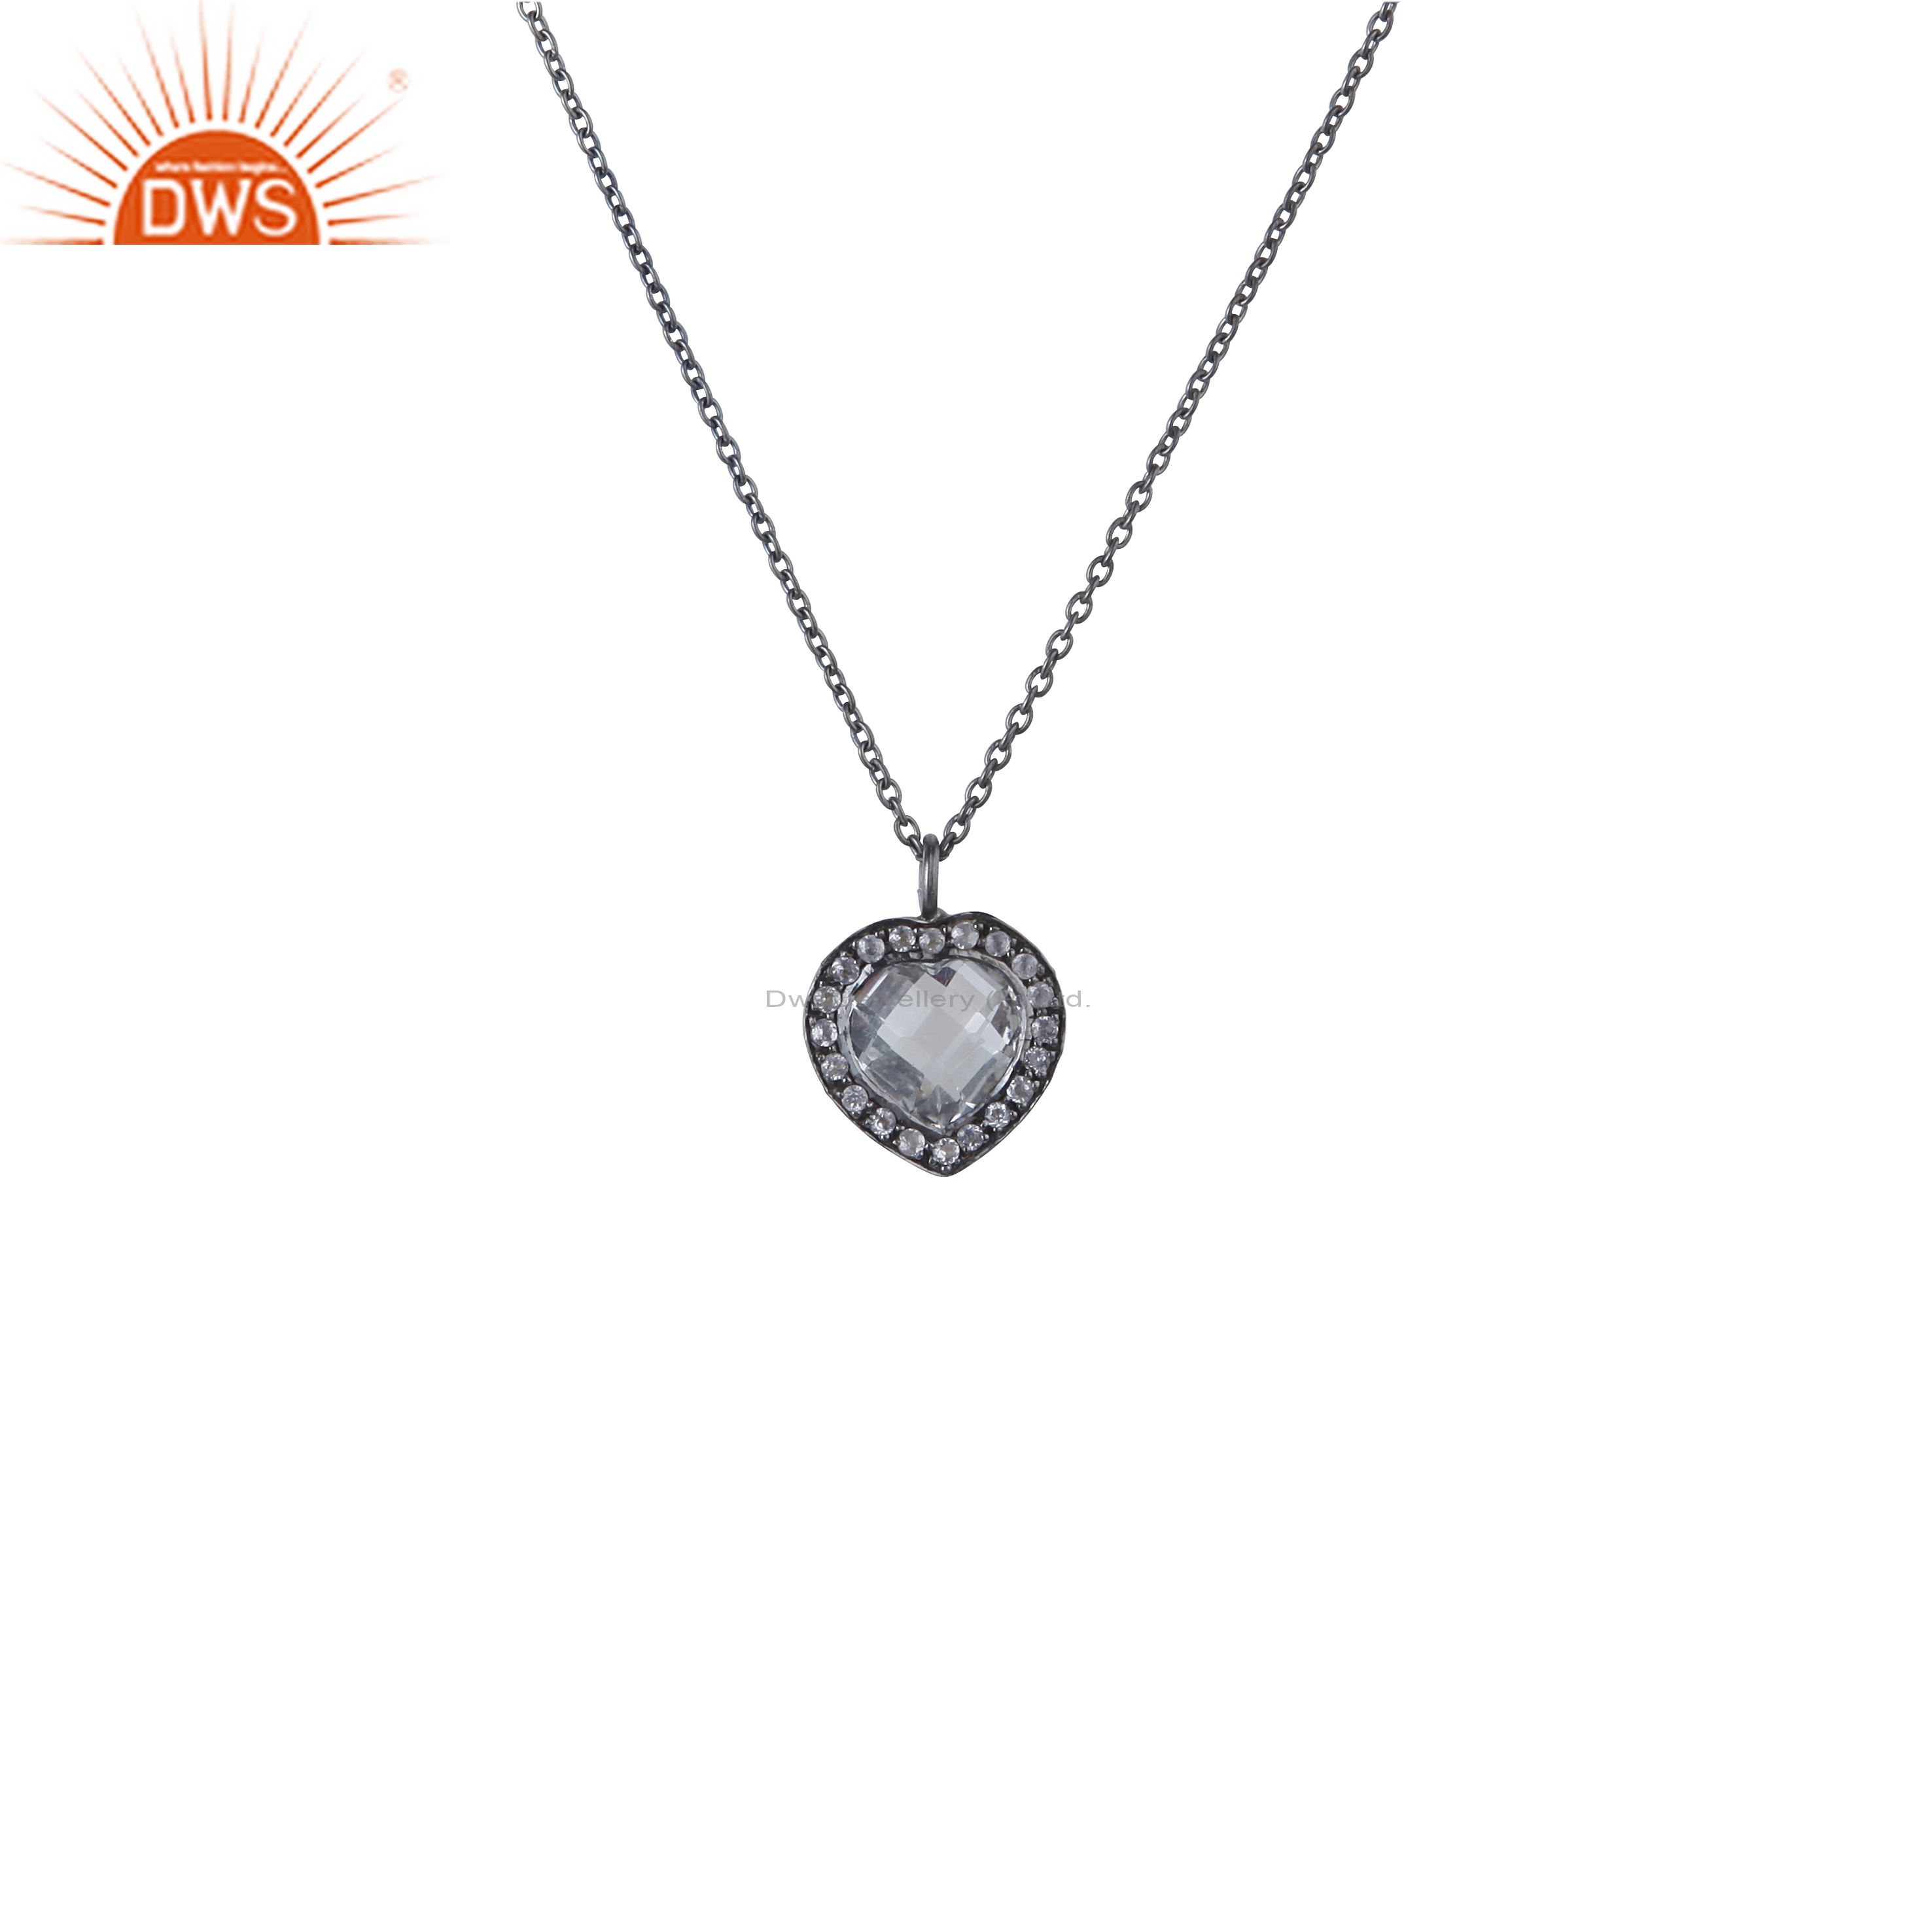 Oxidized sterling silver crystal quartz and white topaz heart pendant with chain